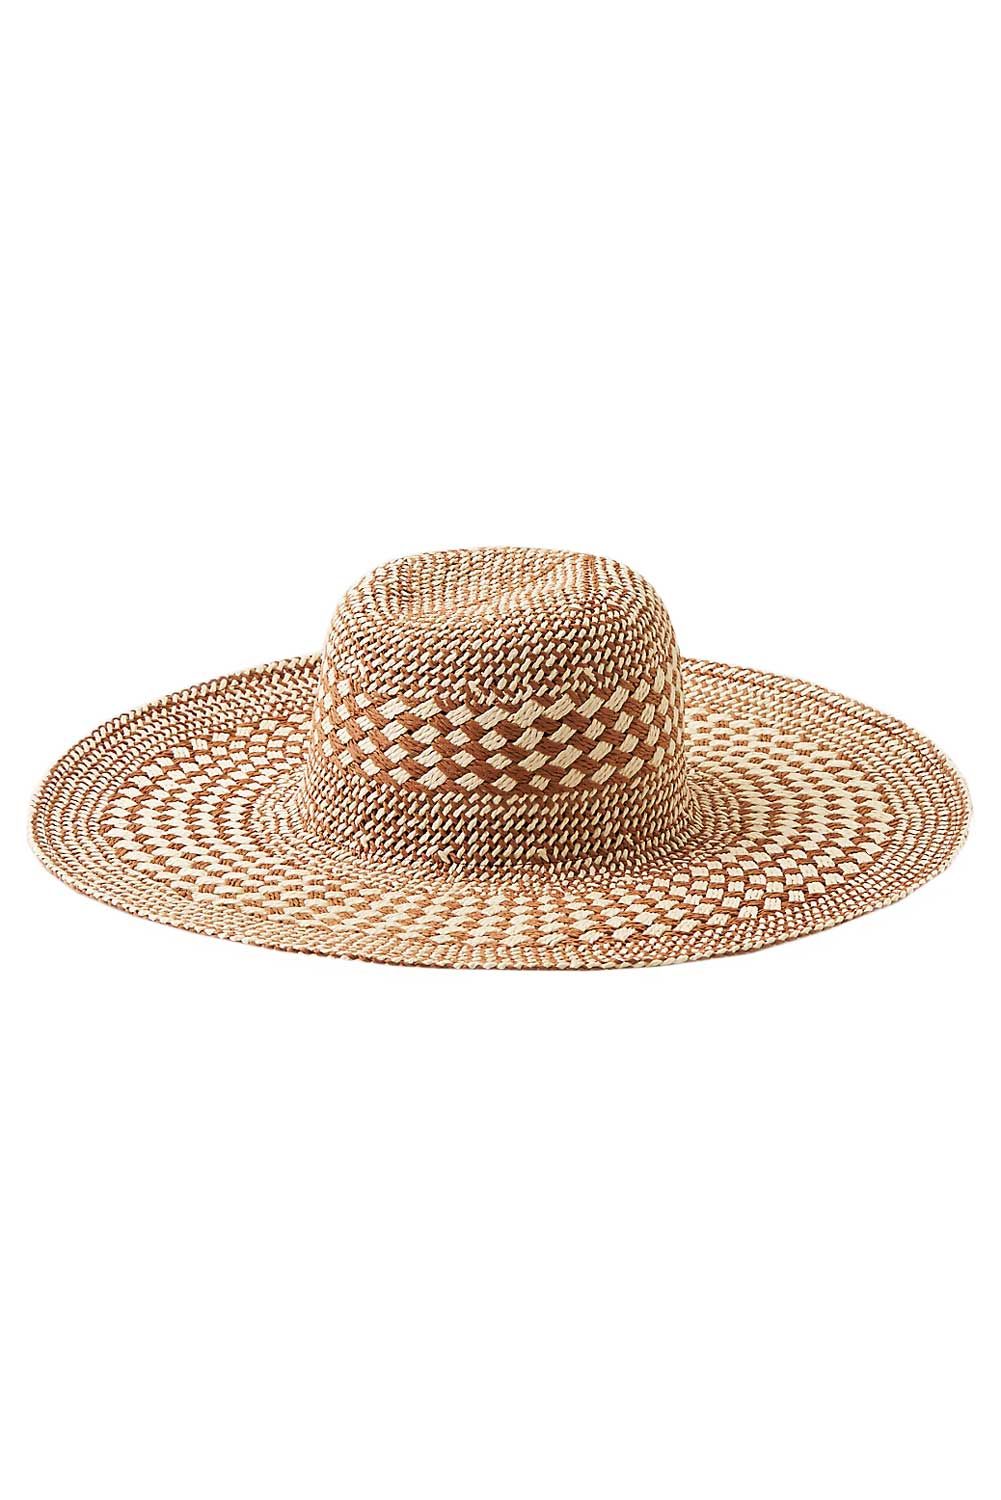 Aerie Two Colors Floppy Hat